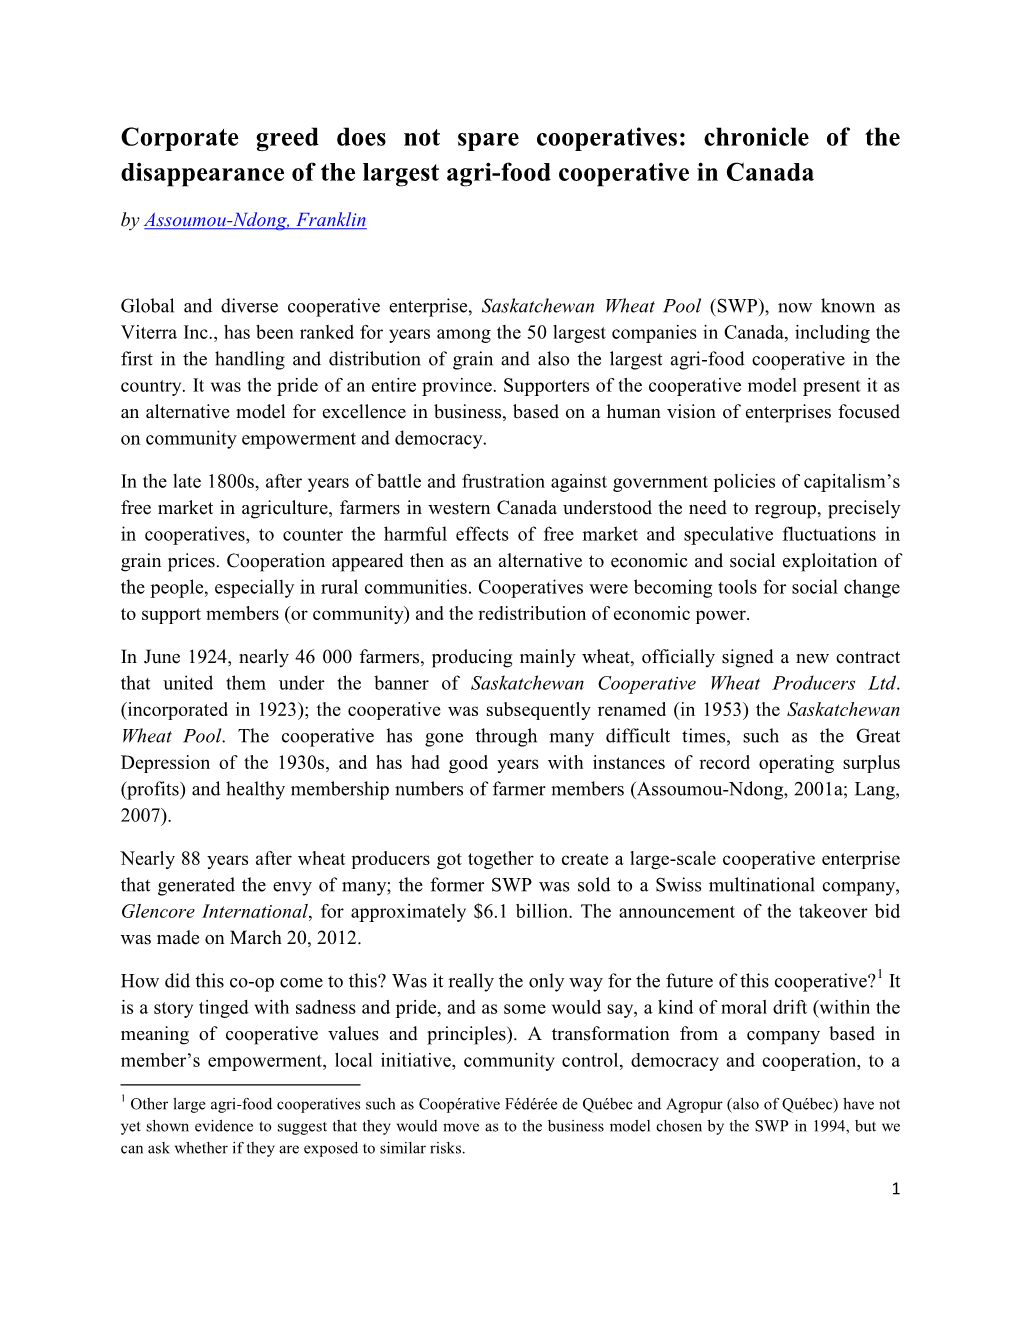 Corporate Greed Does Not Spare Cooperatives: Chronicle of the Disappearance of the Largest Agri-Food Cooperative in Canada by Assoumou-Ndong, Franklin